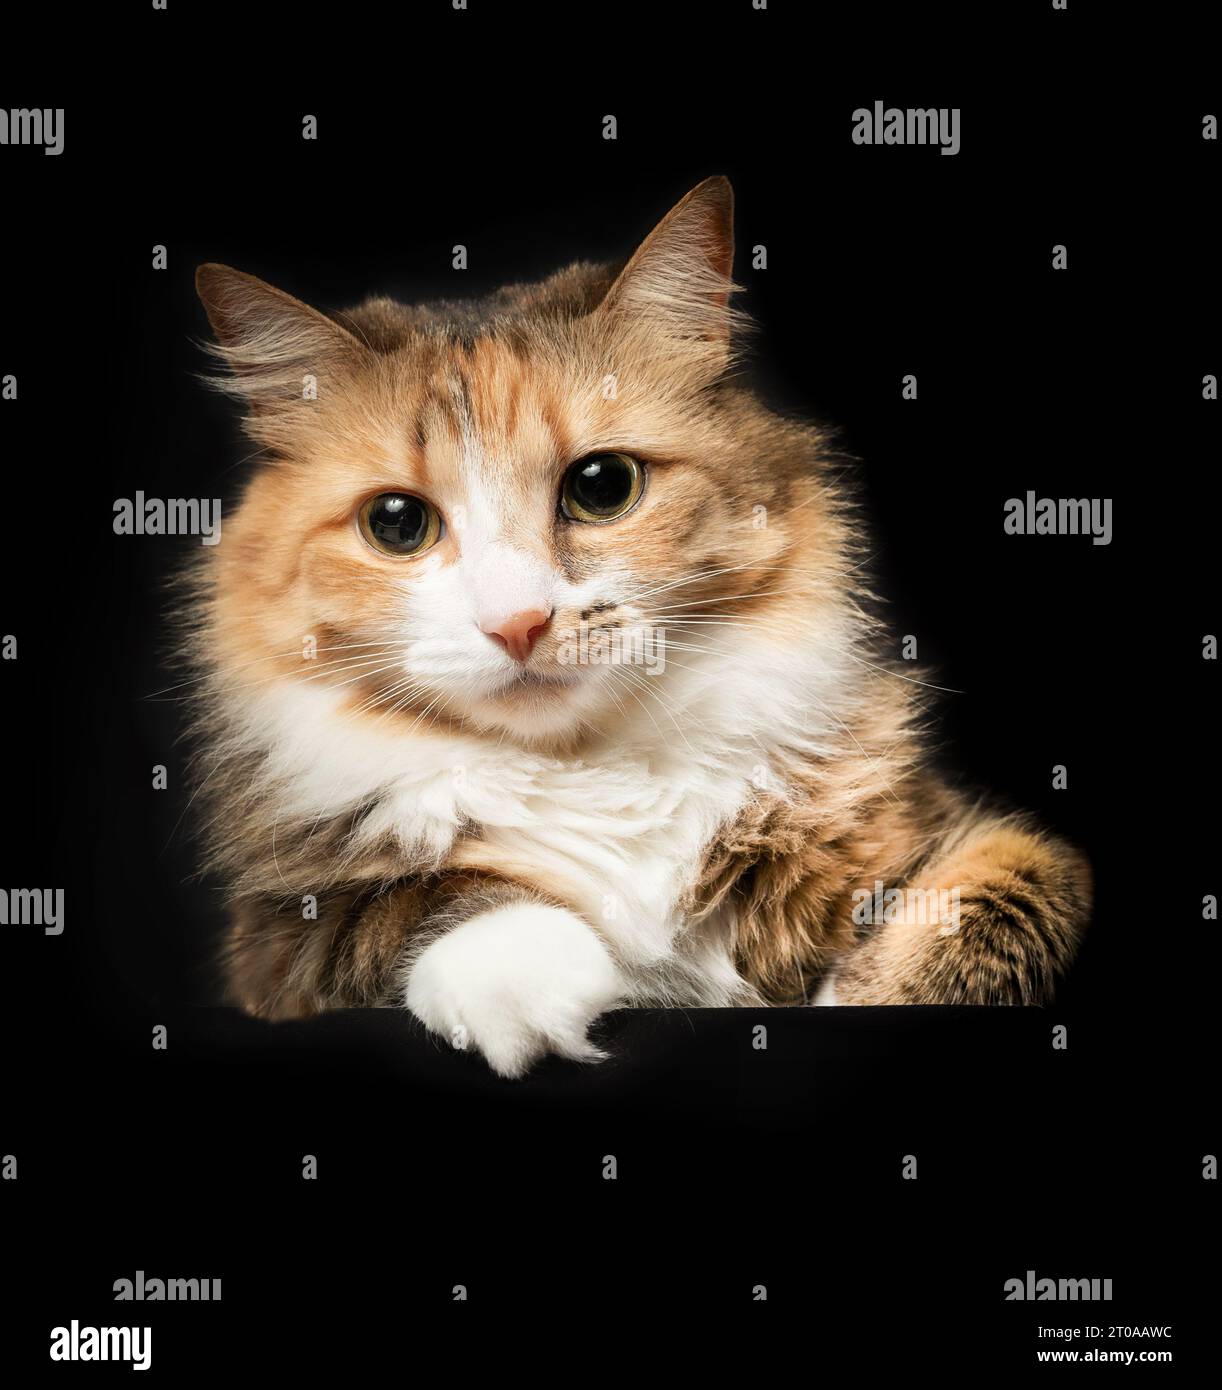 Fluffy cat lying on table while looking at camera. Cat on black background.  Cute long hair calico or torbie female kitty with striking asymmetric mar Stock Photo